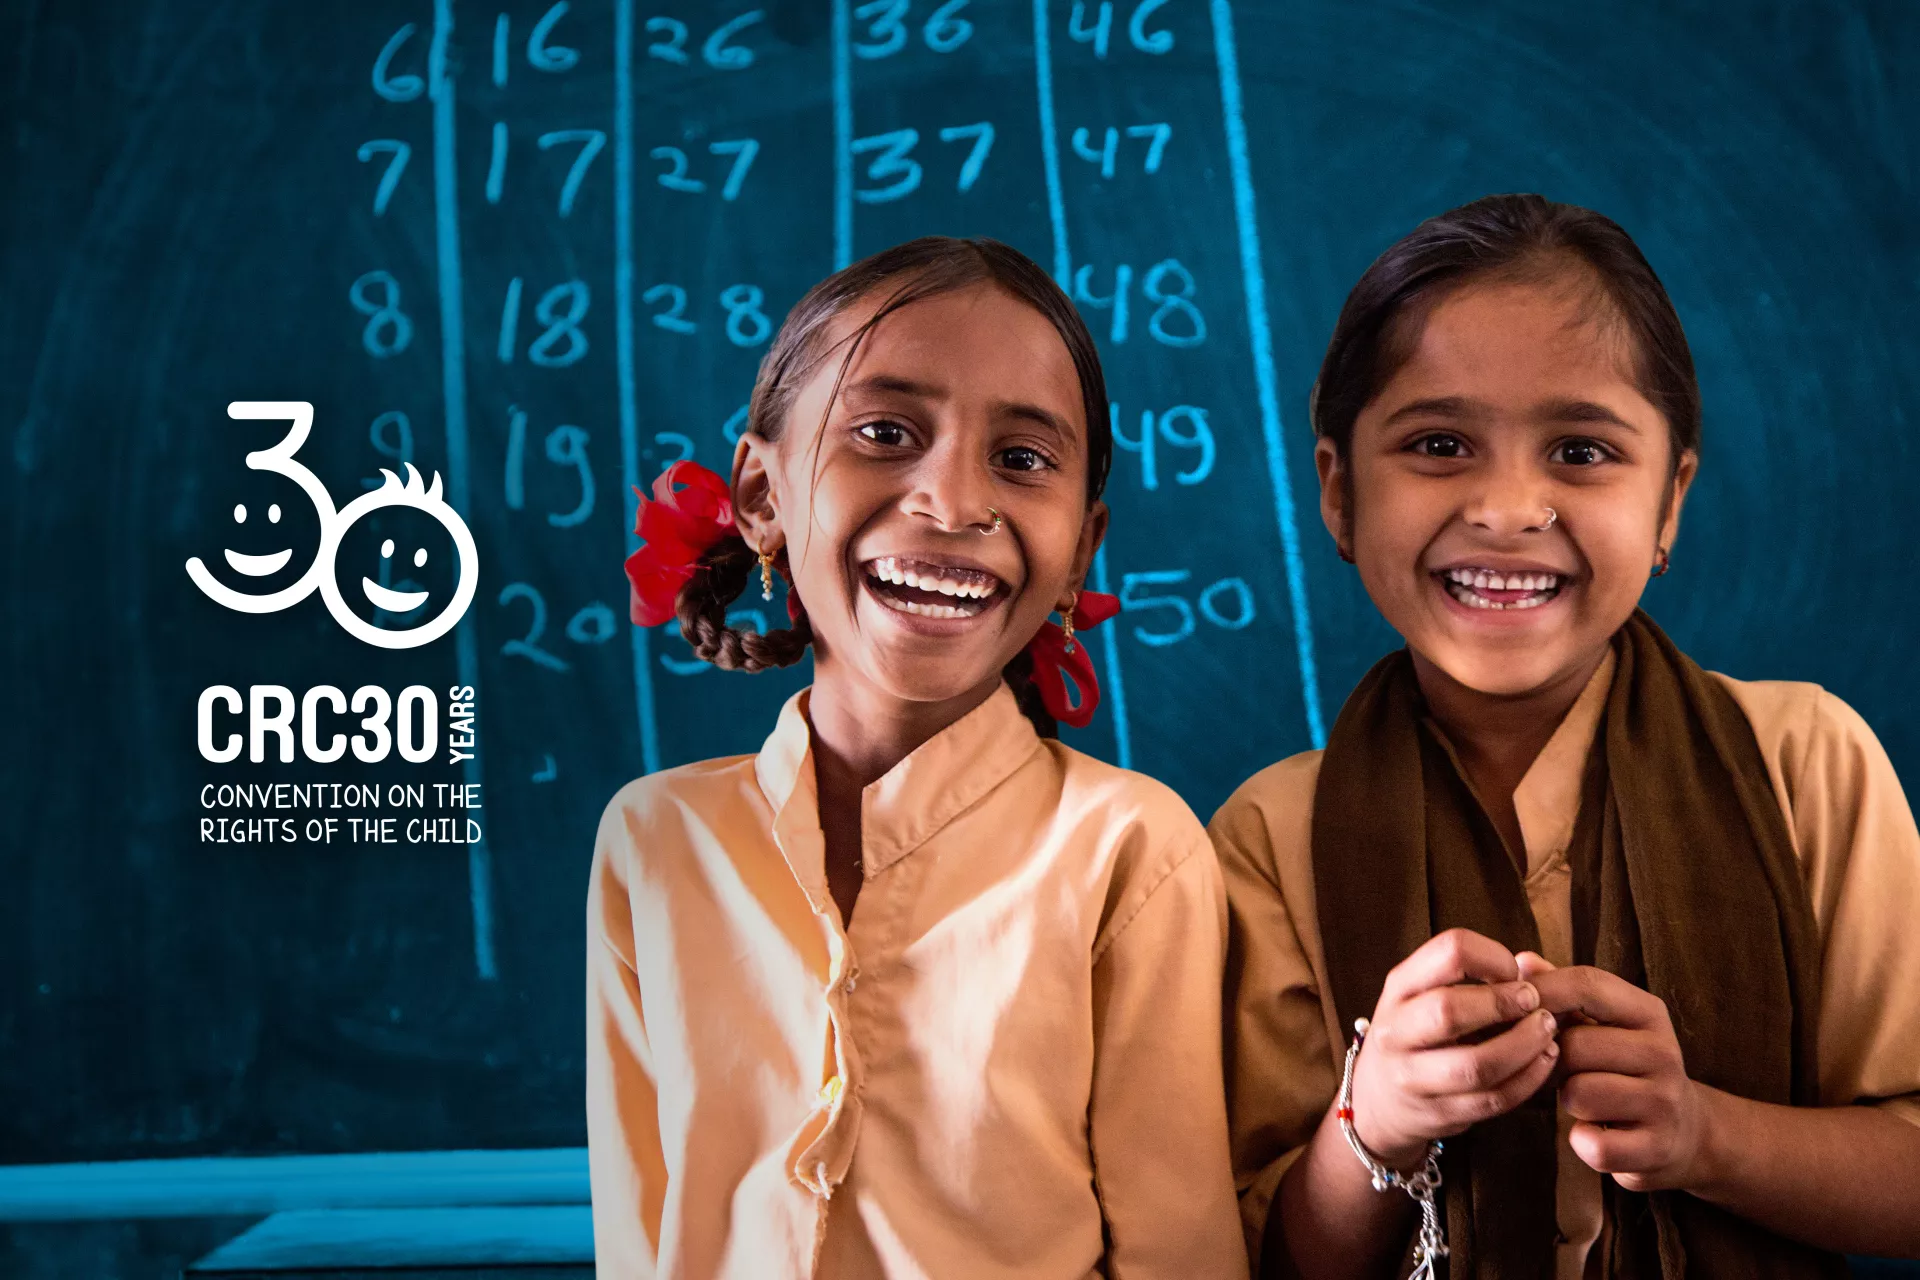 Convention on the Rights of the Child: A 7-year-old student and her best friend stand together in a school classroom in India.